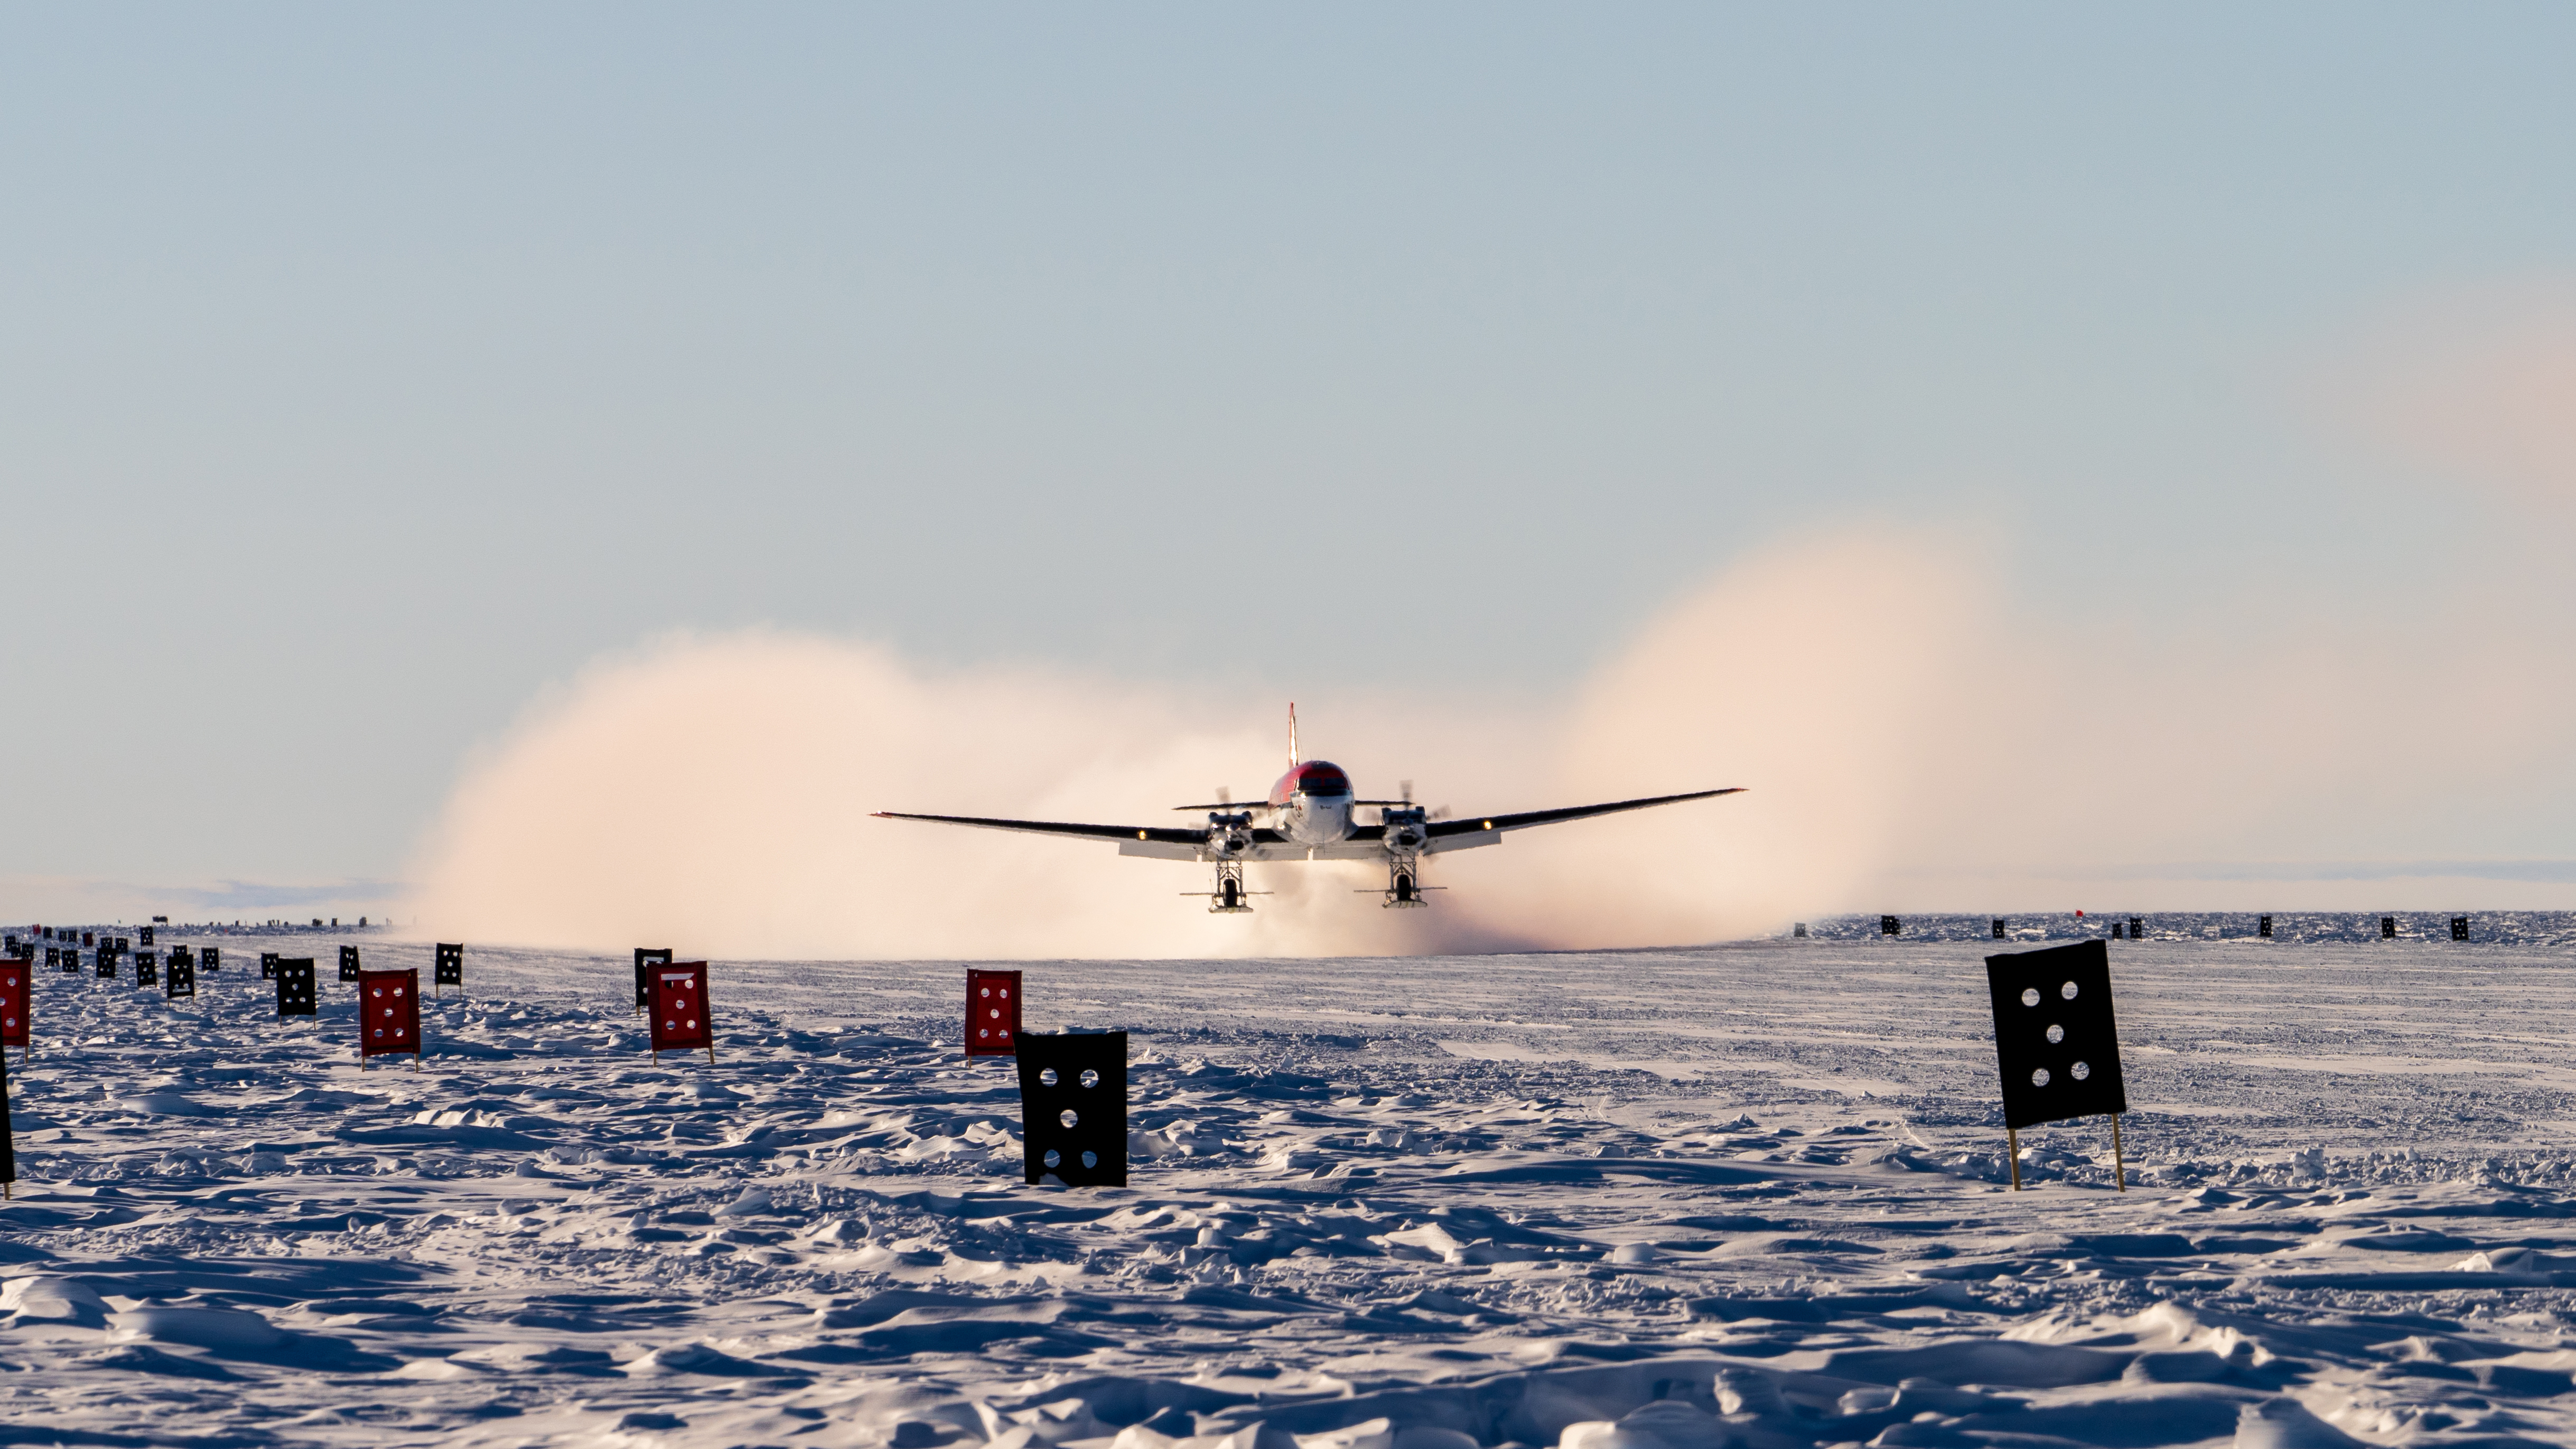 A small airplane landing on snow.